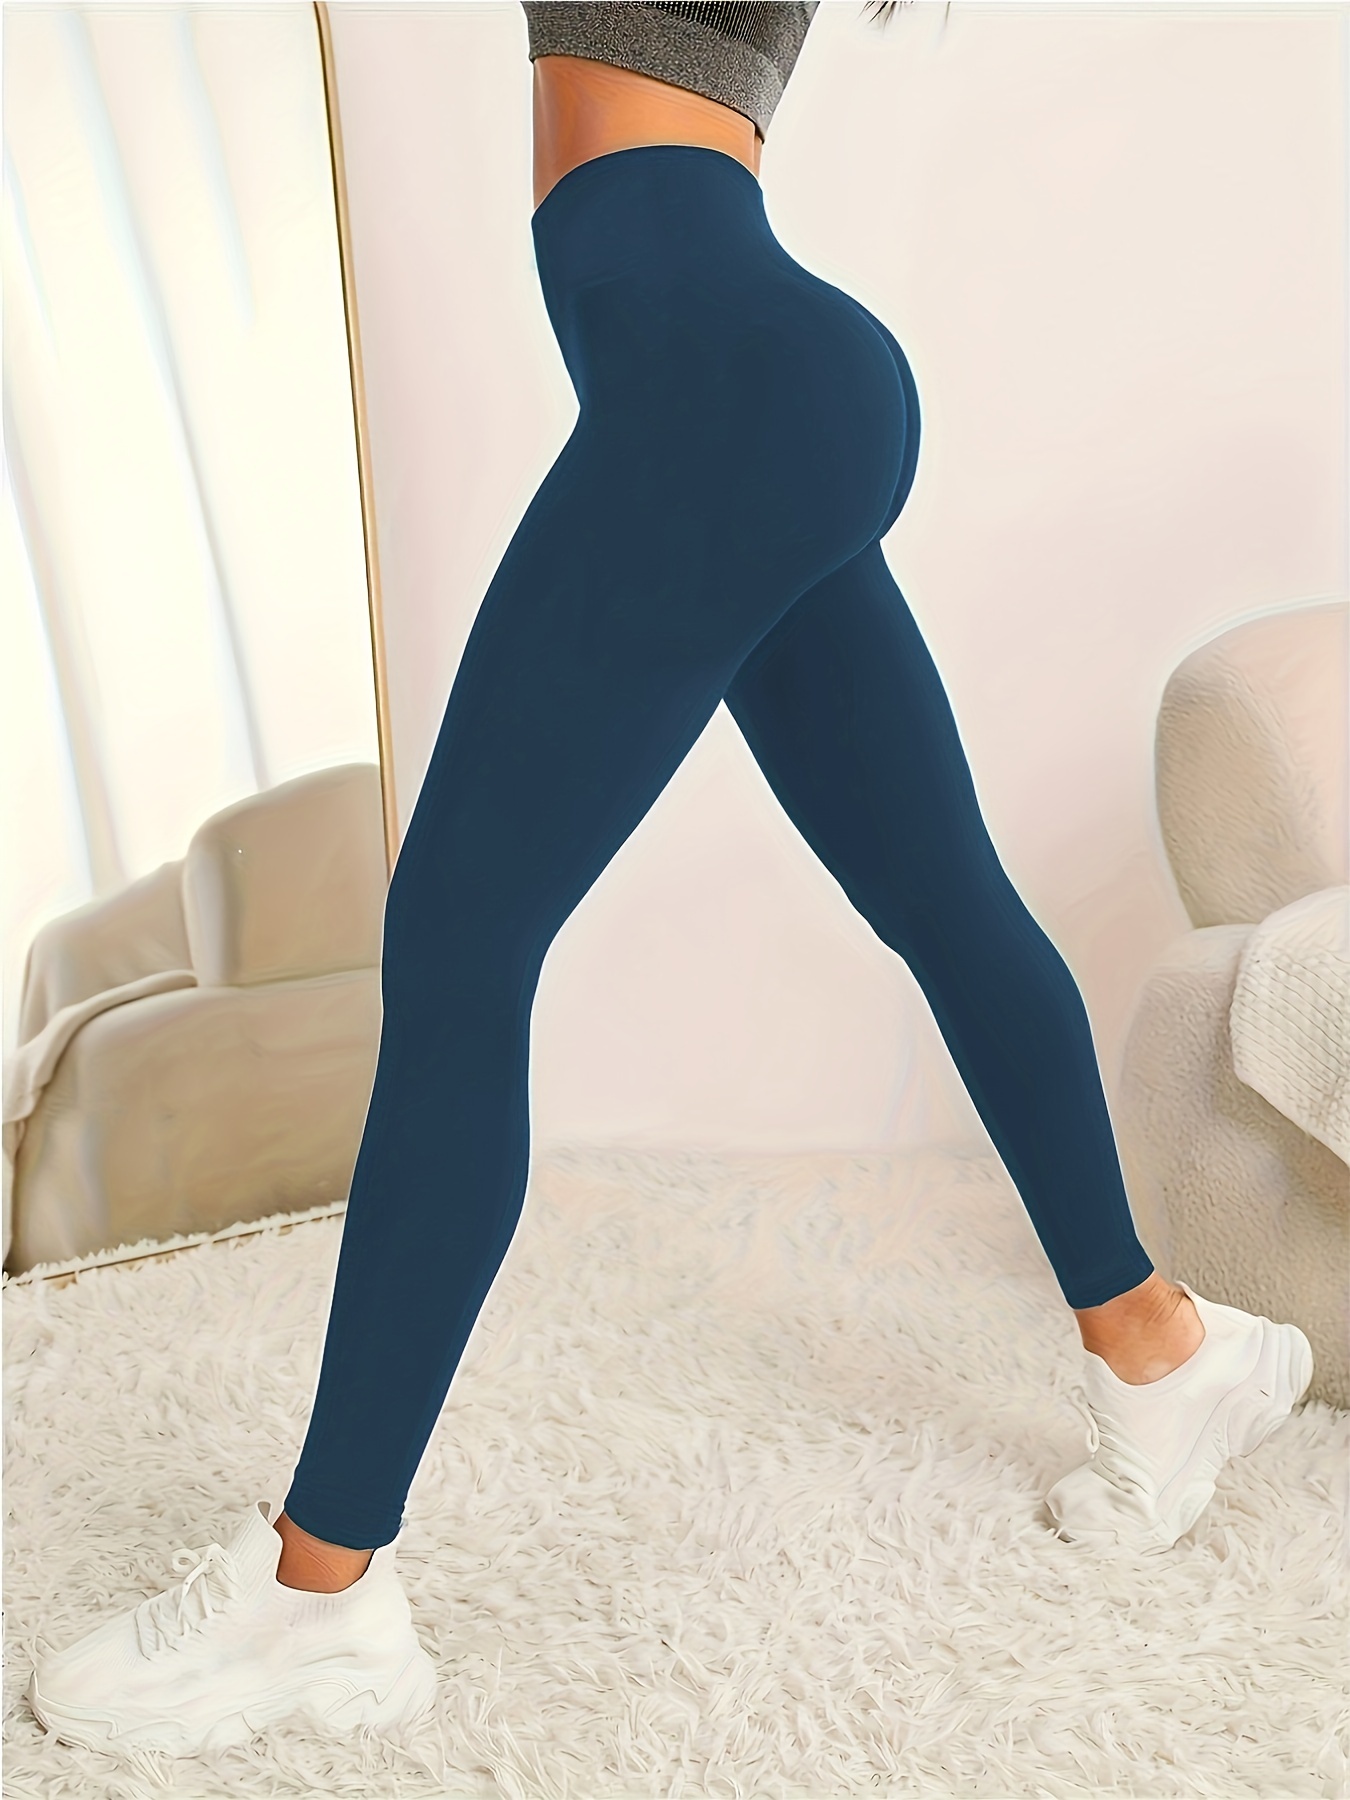 SMihono Skinny Slim Women's Sexy Leggings Plus Size Color Bottom Small Feet  Sports High Waist Thin Leather Pants Full Length Athletic Sports Pants for Teen  Girls Love Navy 4 